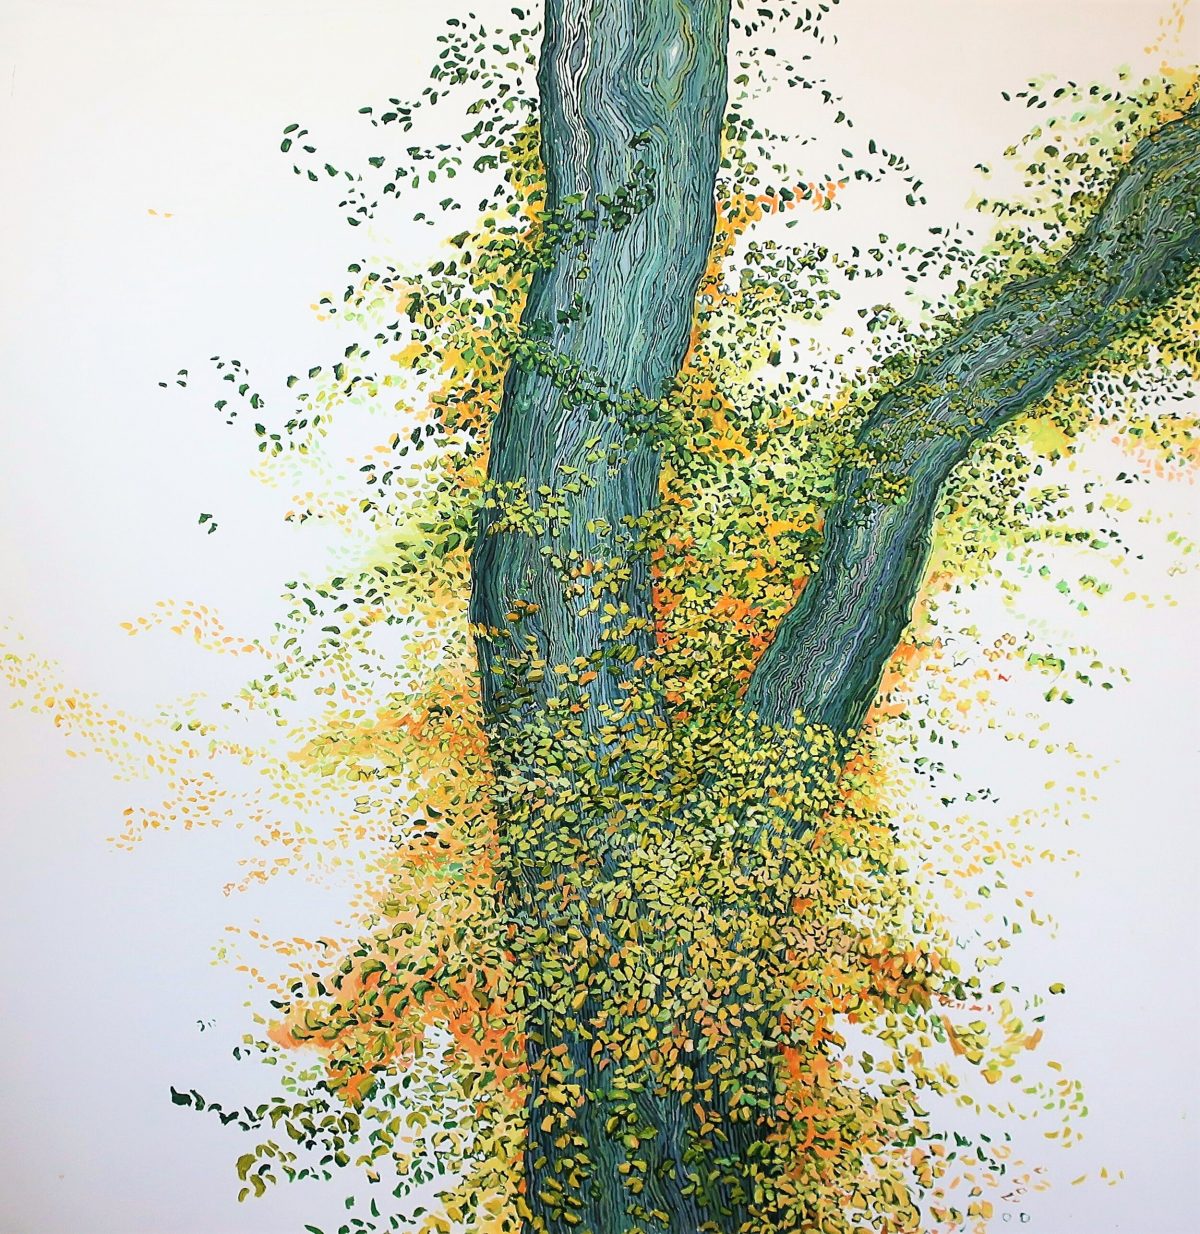 A painting of a bluish tree trunk diverting to two with a bark pattern that resembles water in a river. yellow and green small leaves cover parts of the tree. The tree is over a solid white background.
